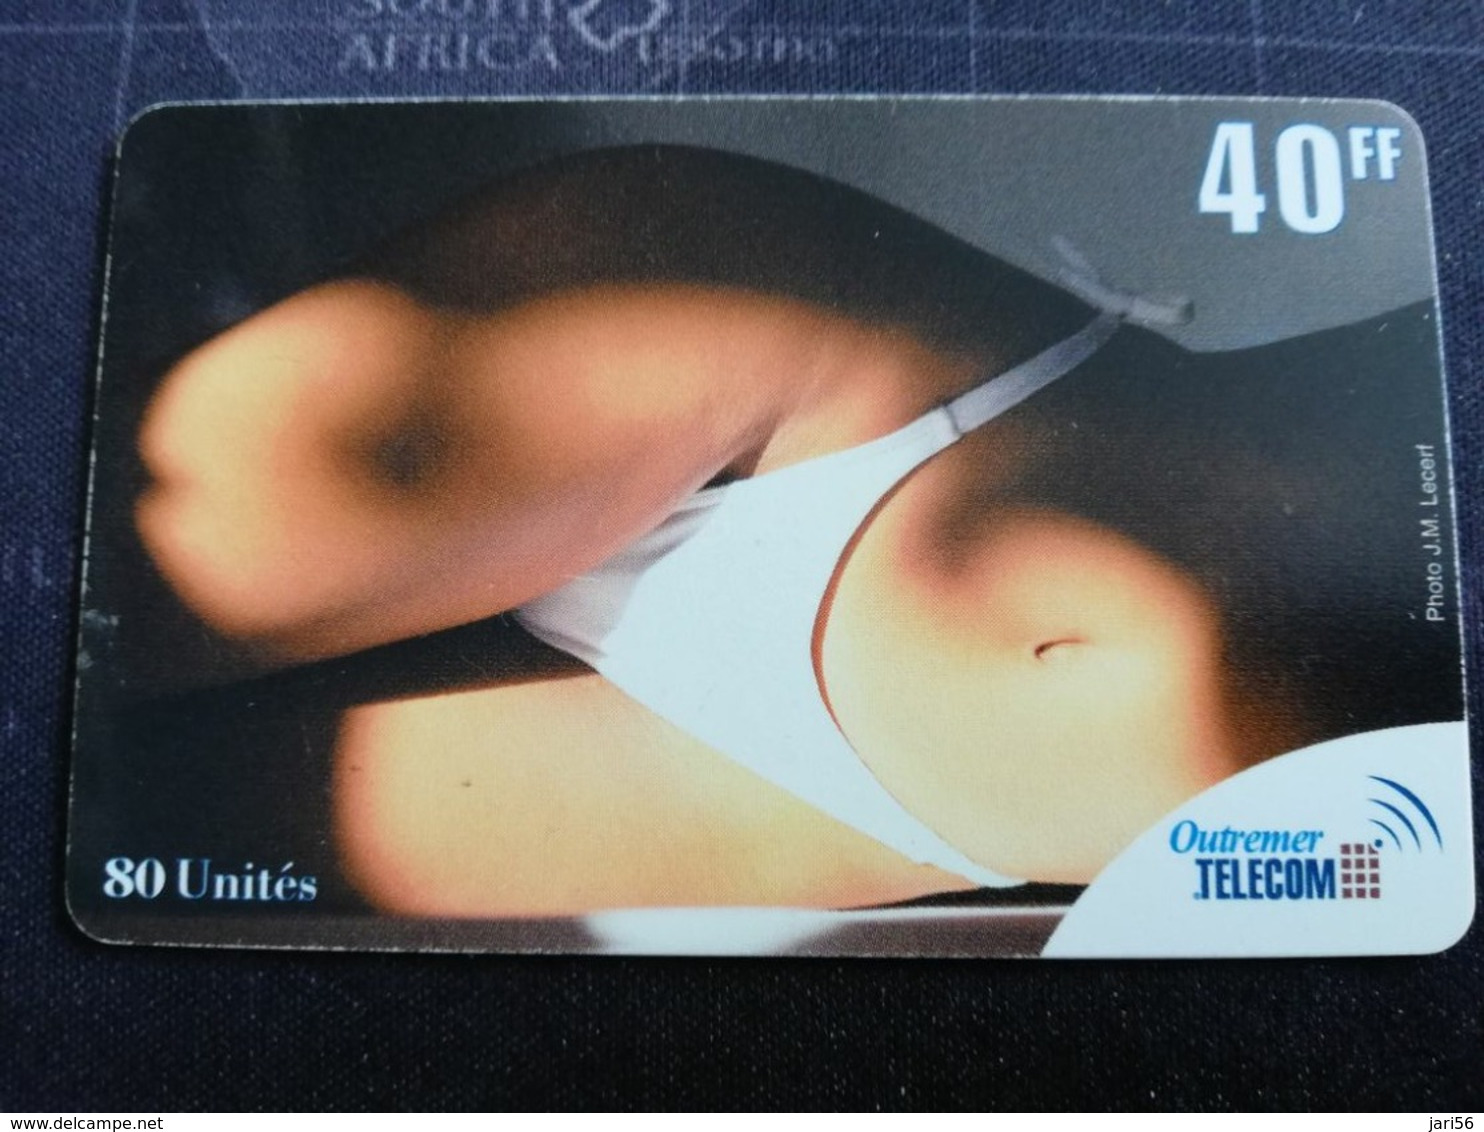 Caribbean Phonecard St Martin French  40 UNITS NICE  LADY IN BIKINI  OUTREMER TELECOM     **3033 ** - Antilles (Françaises)